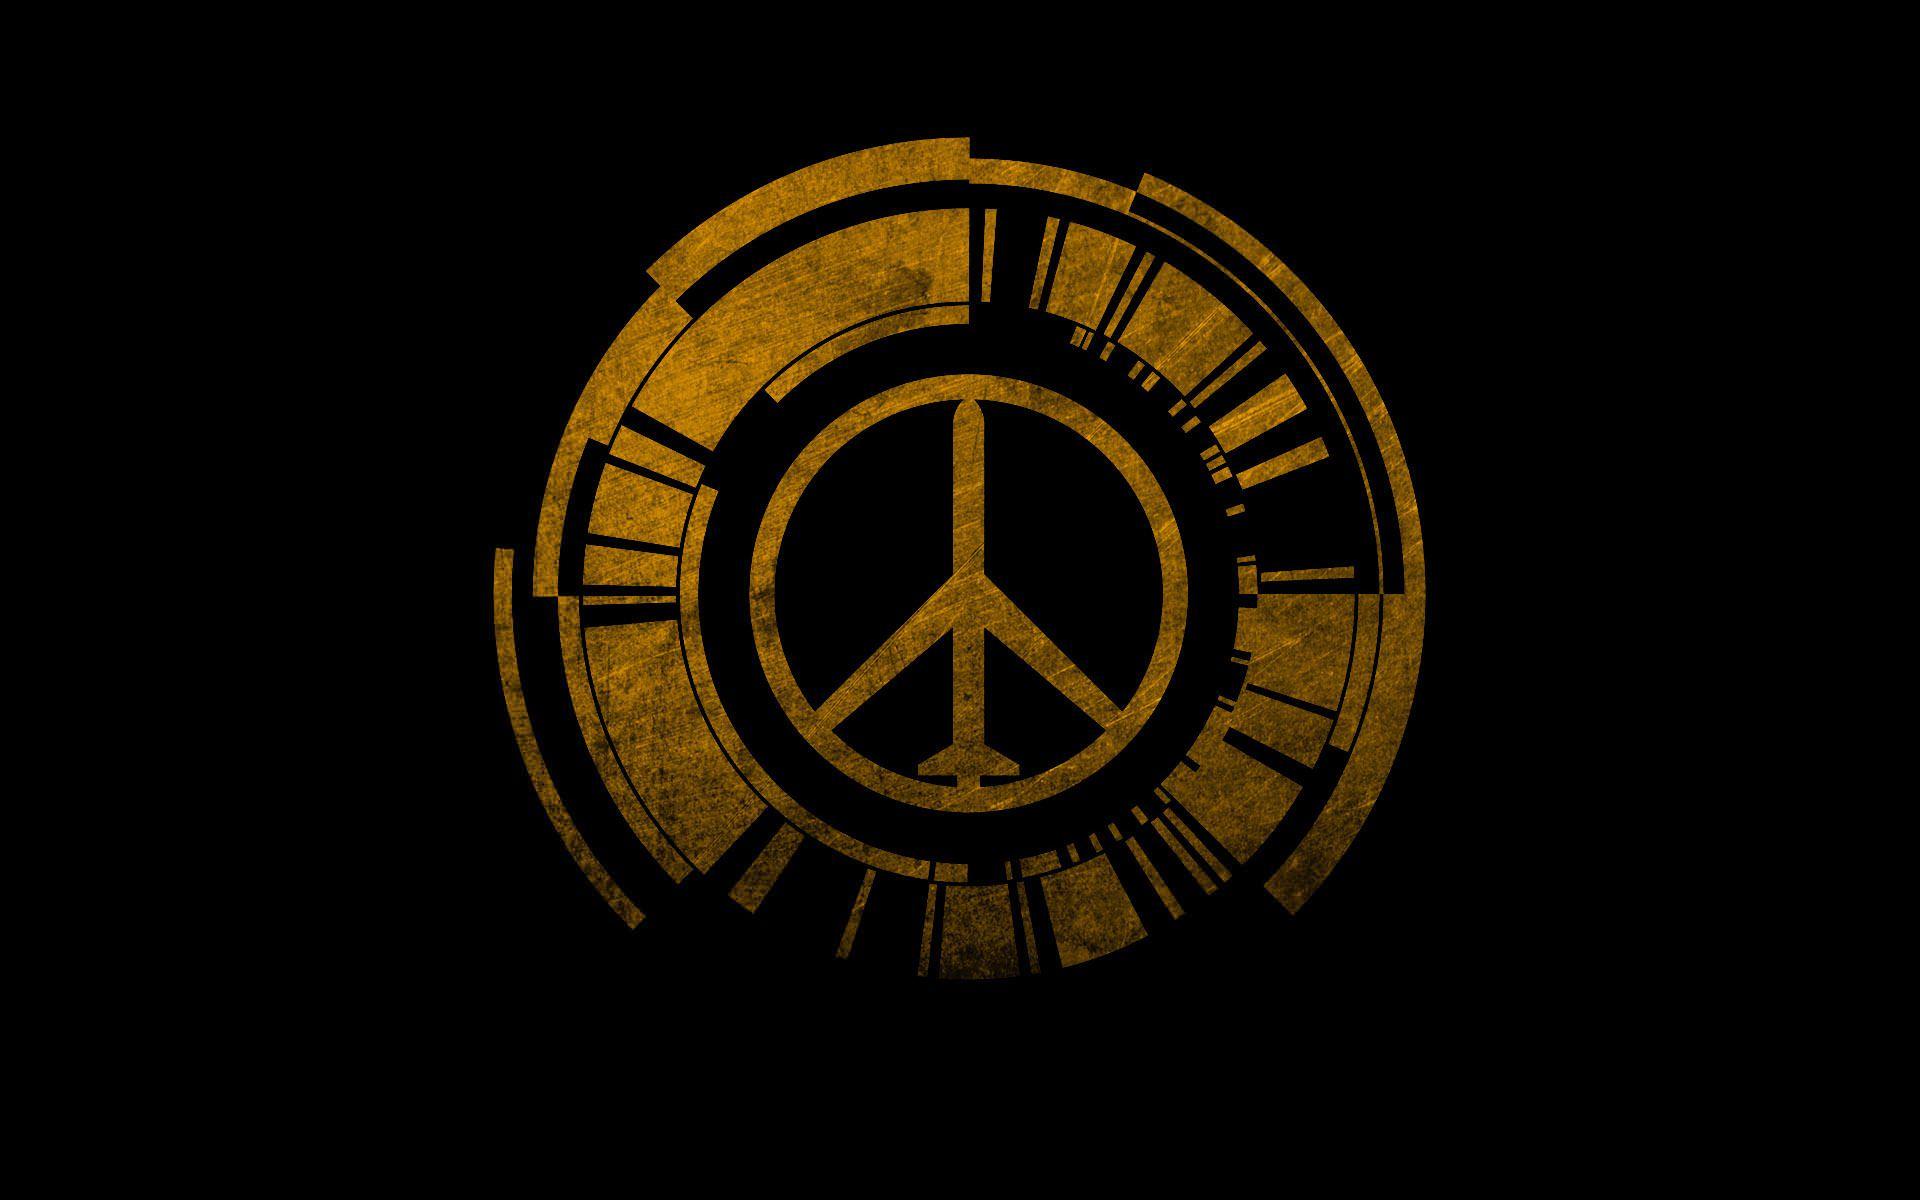 Searching for Peace Wallpaper in HD quality? Well we have put